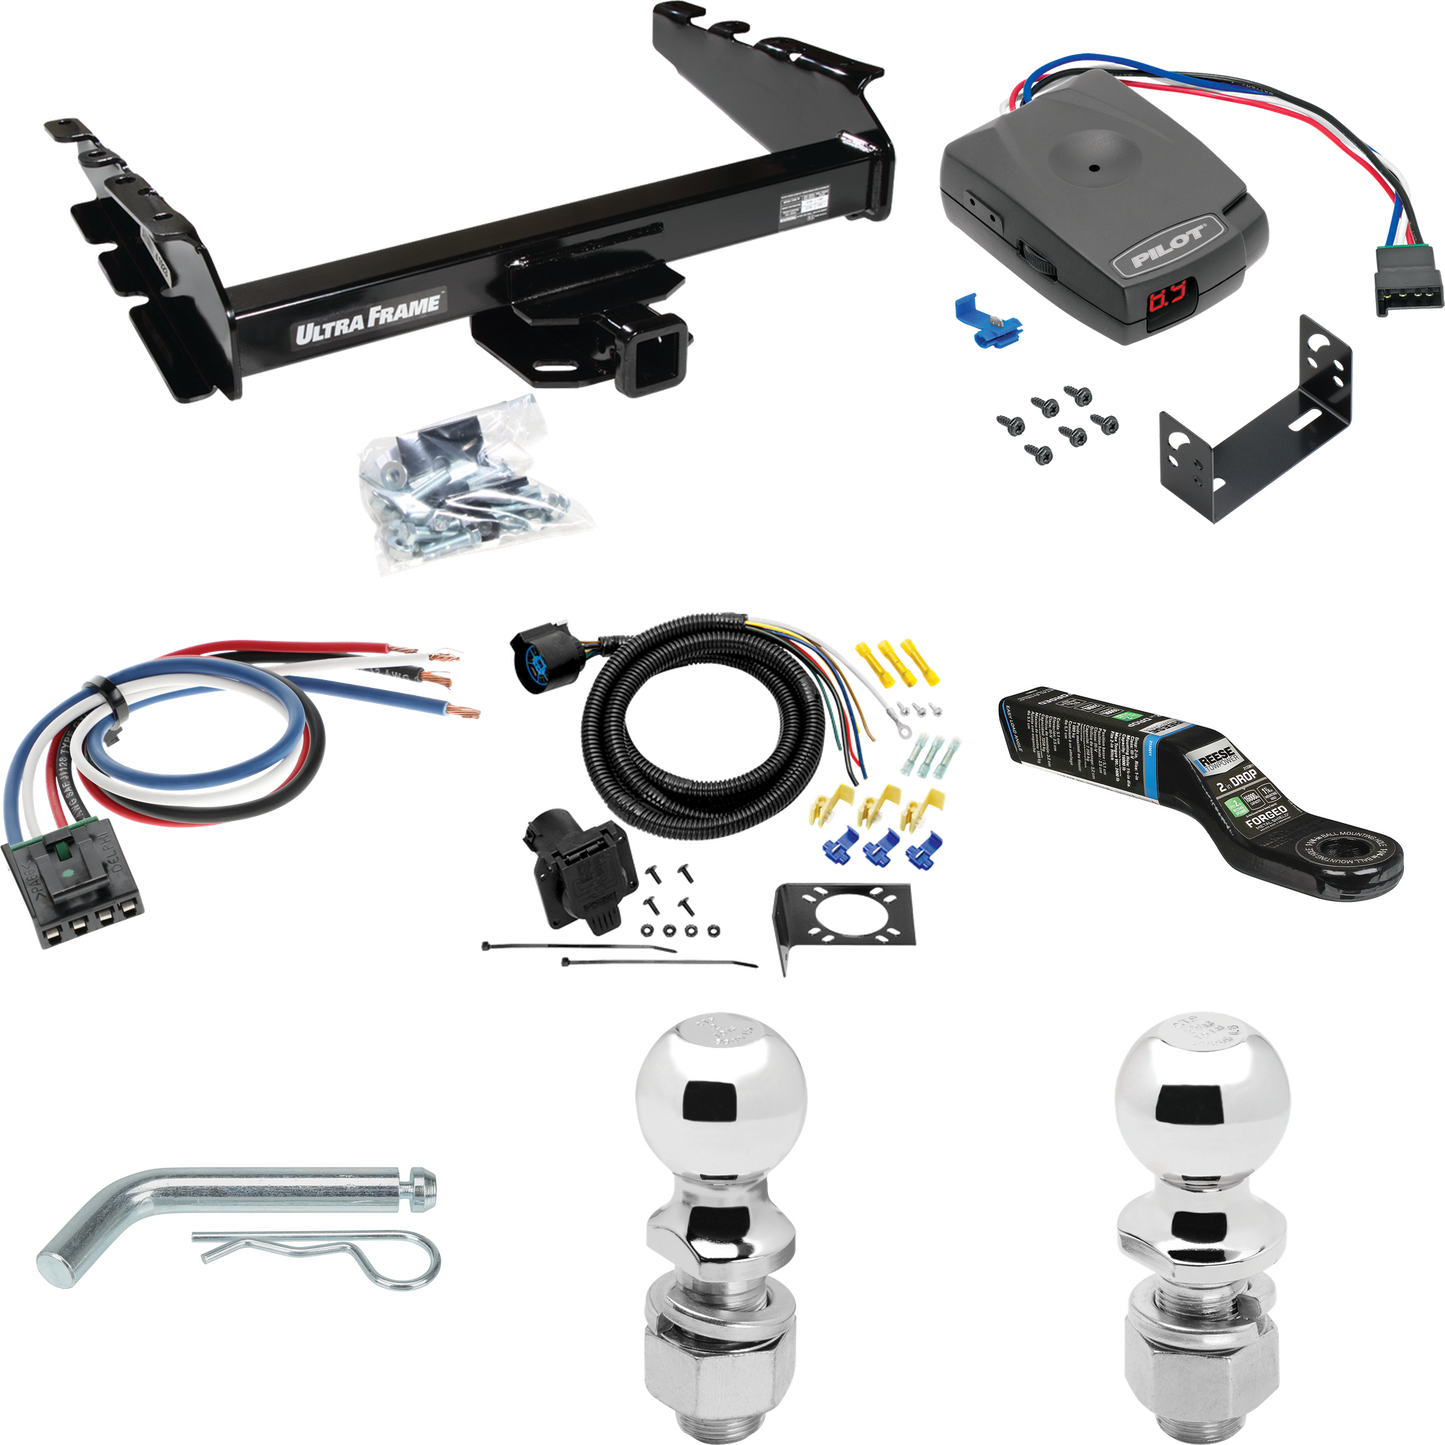 Fits 1994-1994 Dodge Ram 1500 Trailer Hitch Tow PKG w/ Pro Series Pilot Brake Control + Generic BC Wiring Adapter + 7-Way RV Wiring + 2" & 2-5/16" Ball & Drop Mount By Draw-Tite